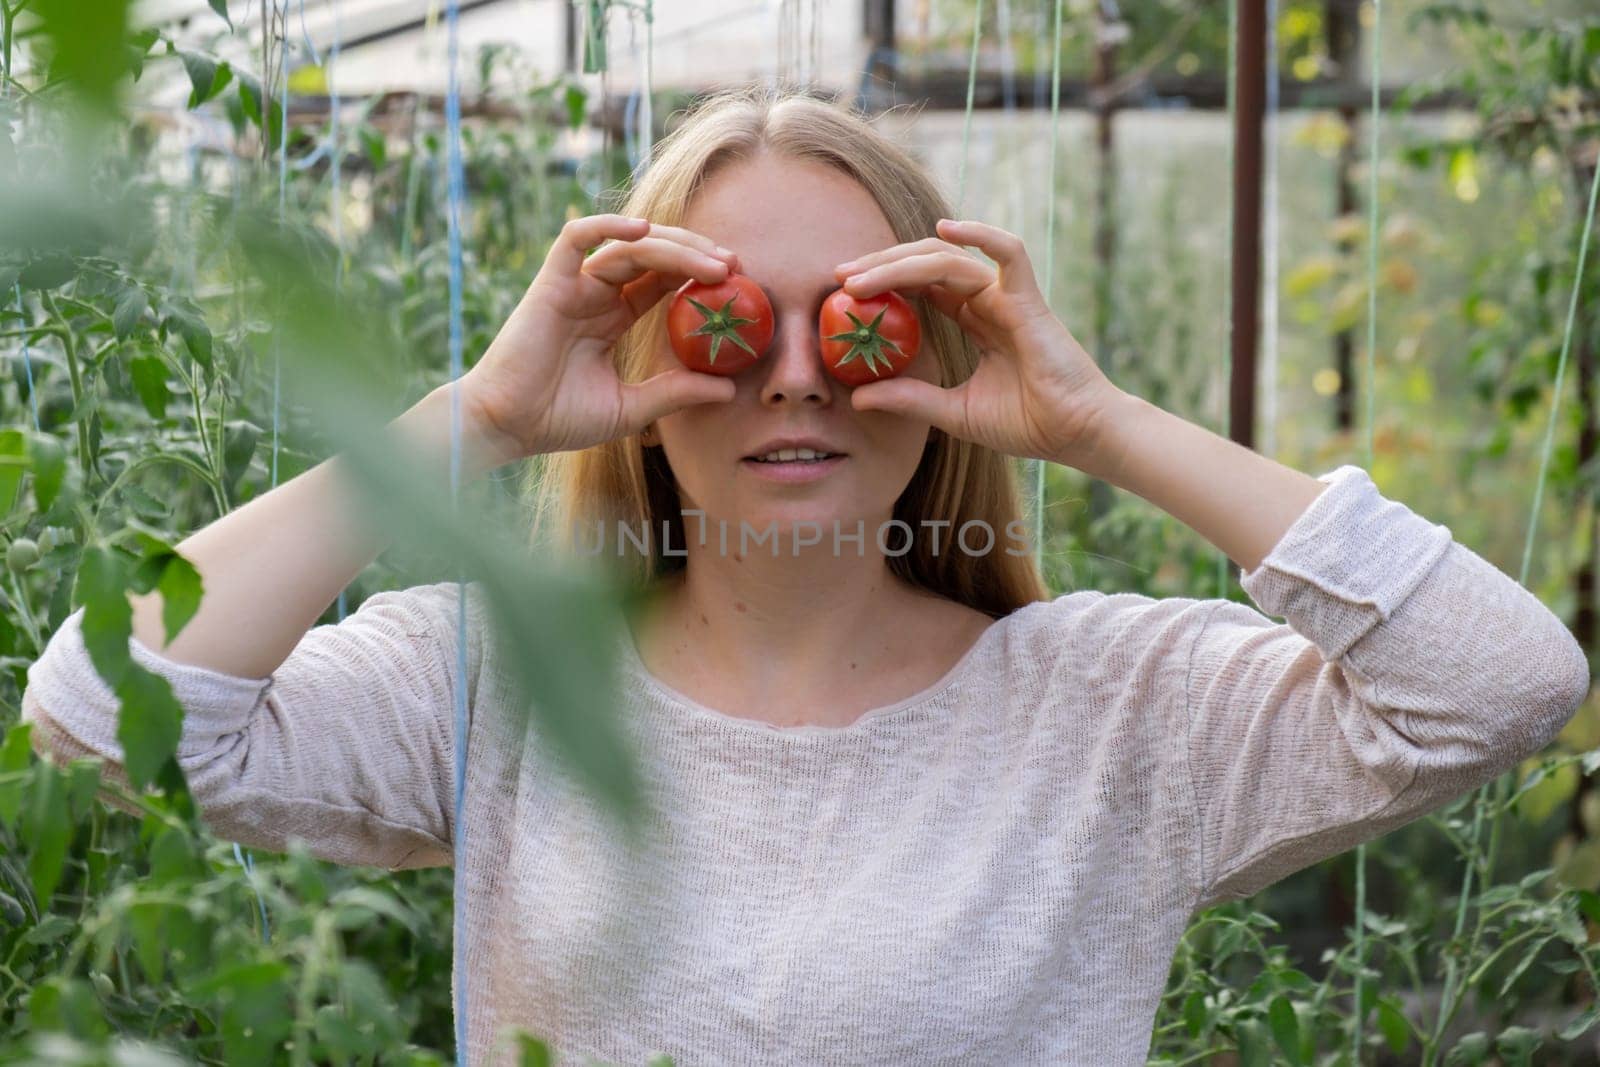 Happy blonde woman holding red tomatoes over eyes in hothouse. Female farmer having fun in green garden while harvesting seasonal organic ripe vegetables. Locally grown concept